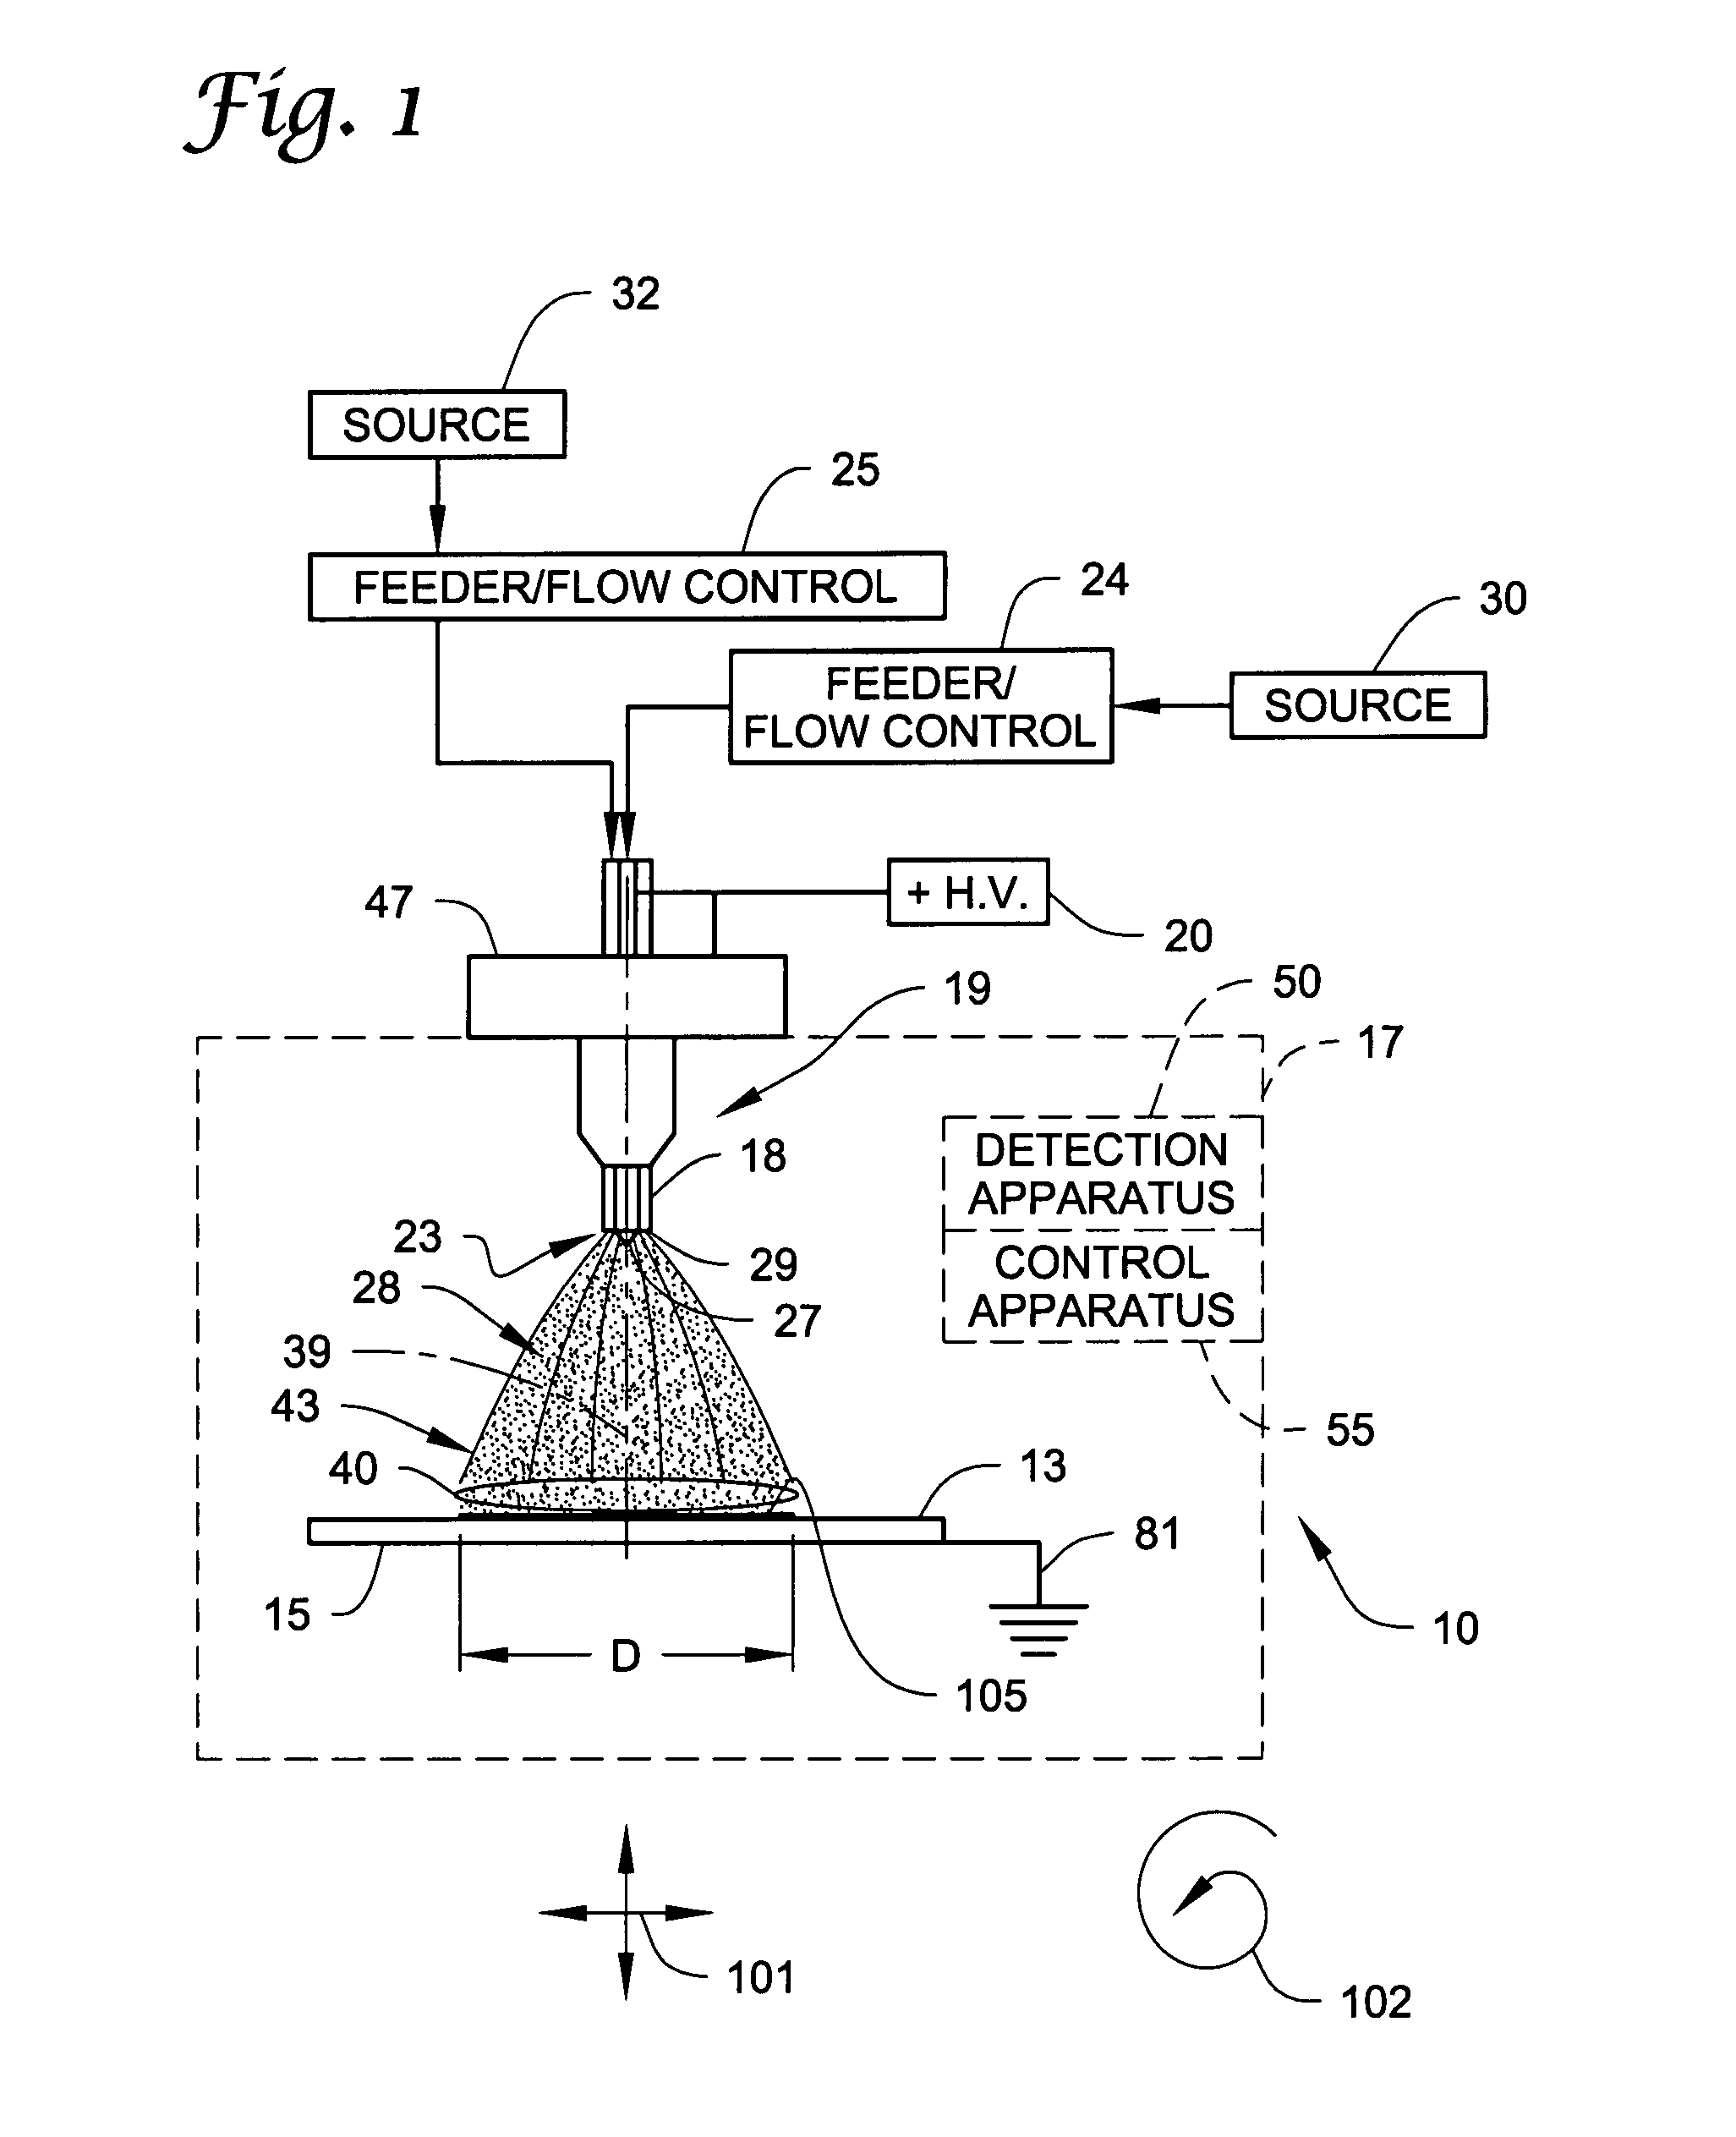 Electrospray coating of objects